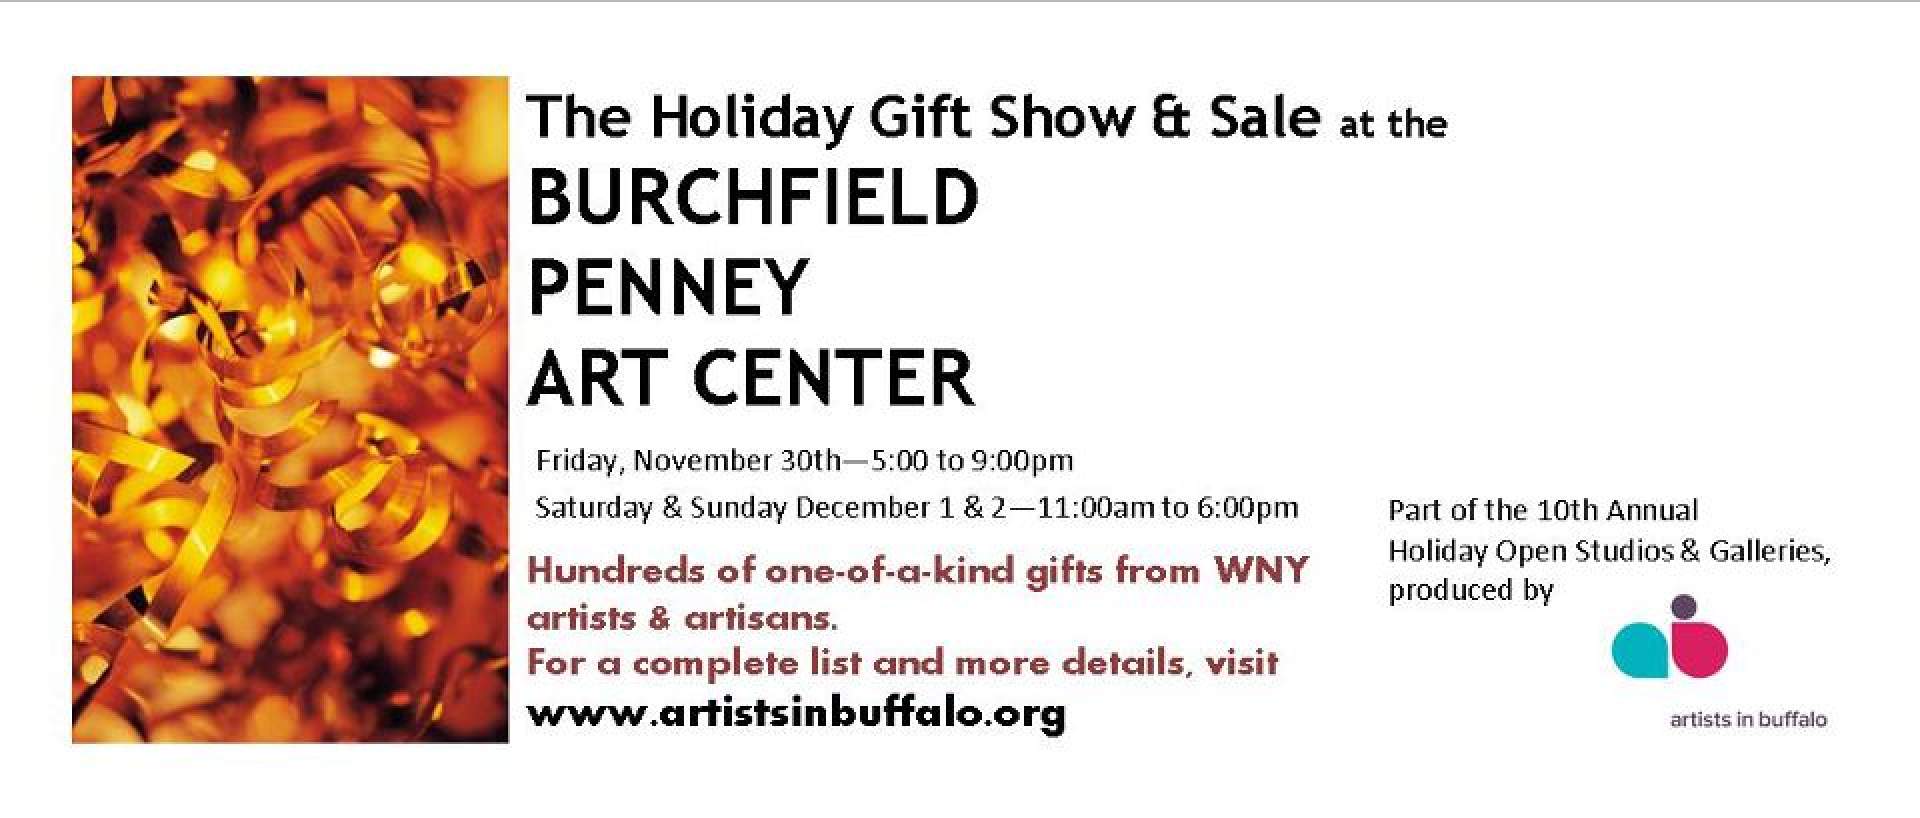 [Holiday Gift Show & Sale, Holiday Open Studios & Galleries]